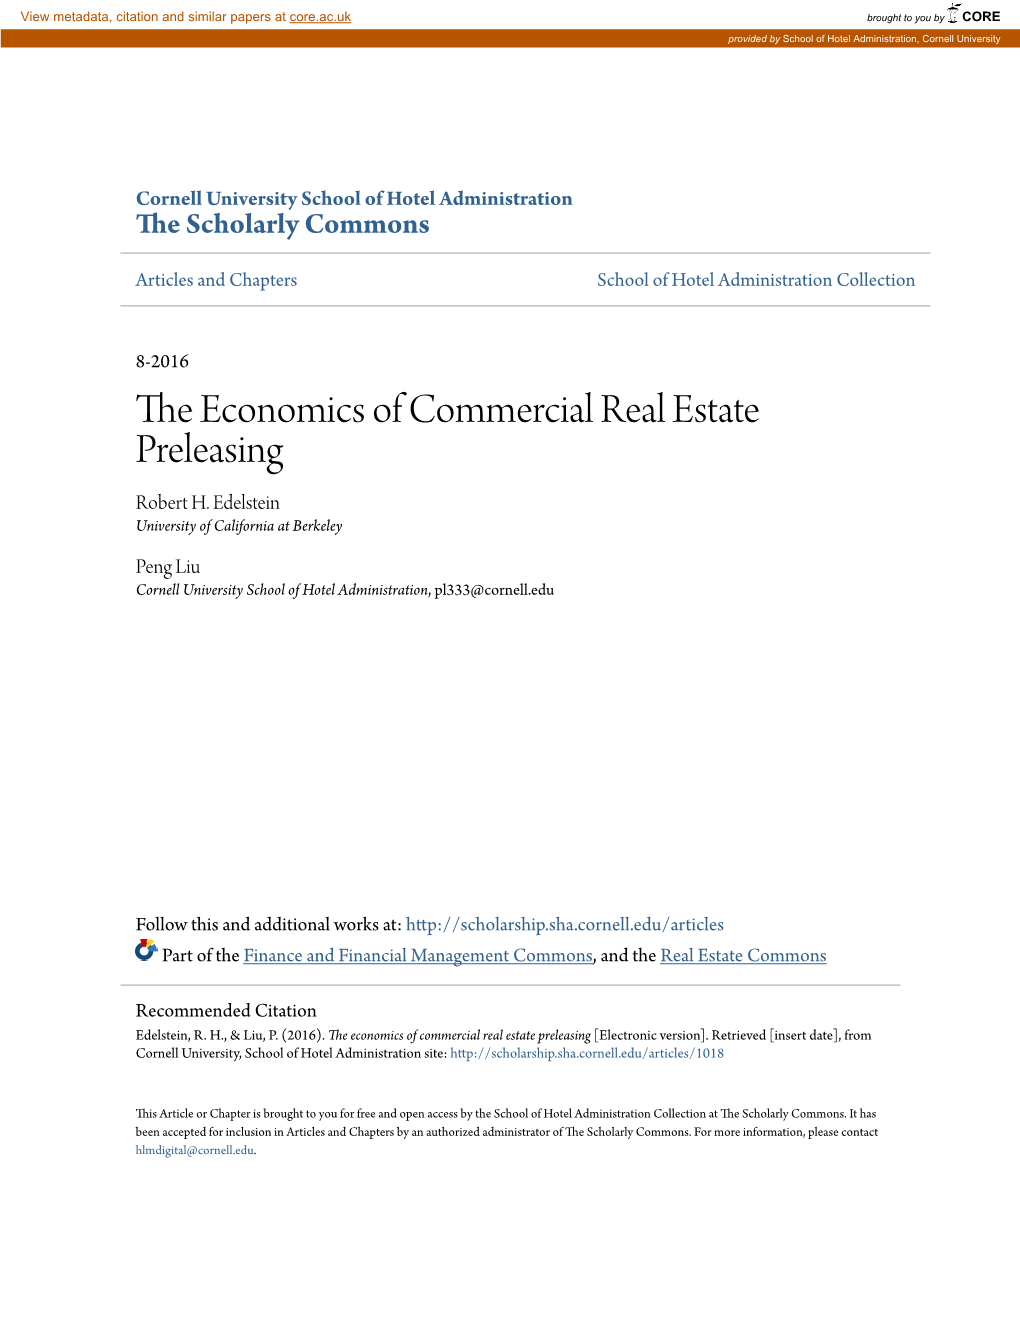 The Economics of Commercial Real Estate Preleasing [Electronic Version]